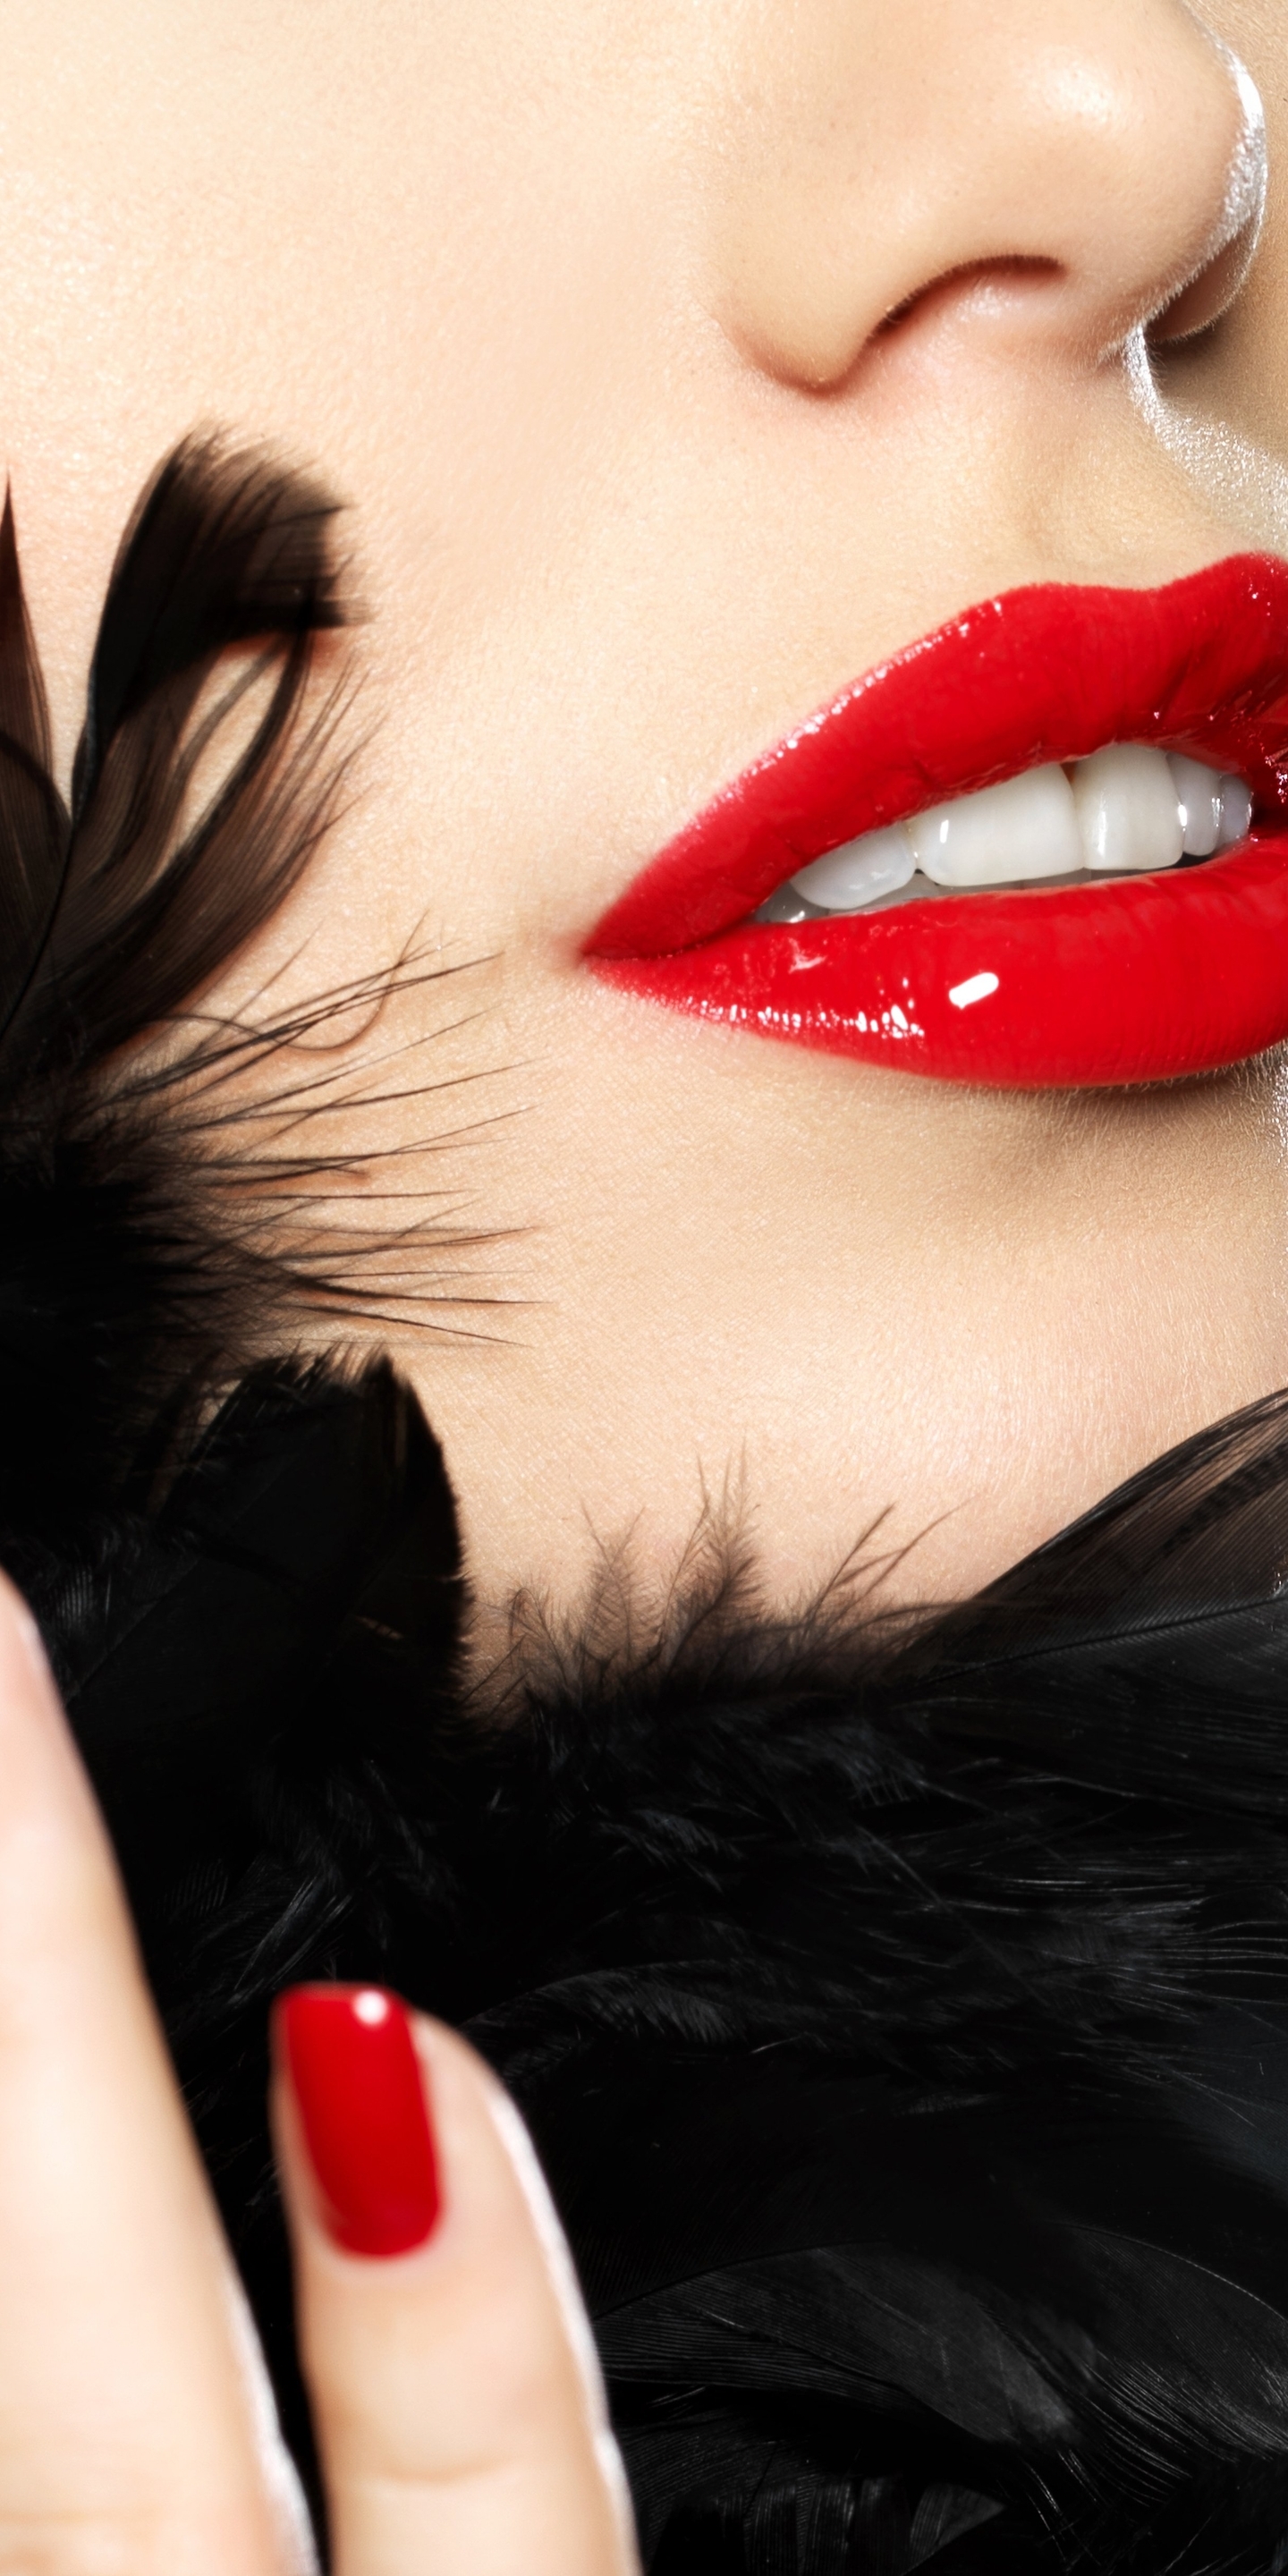 Image: Face, skin, nails, lips, red, feathers, black, nails, teeth, style